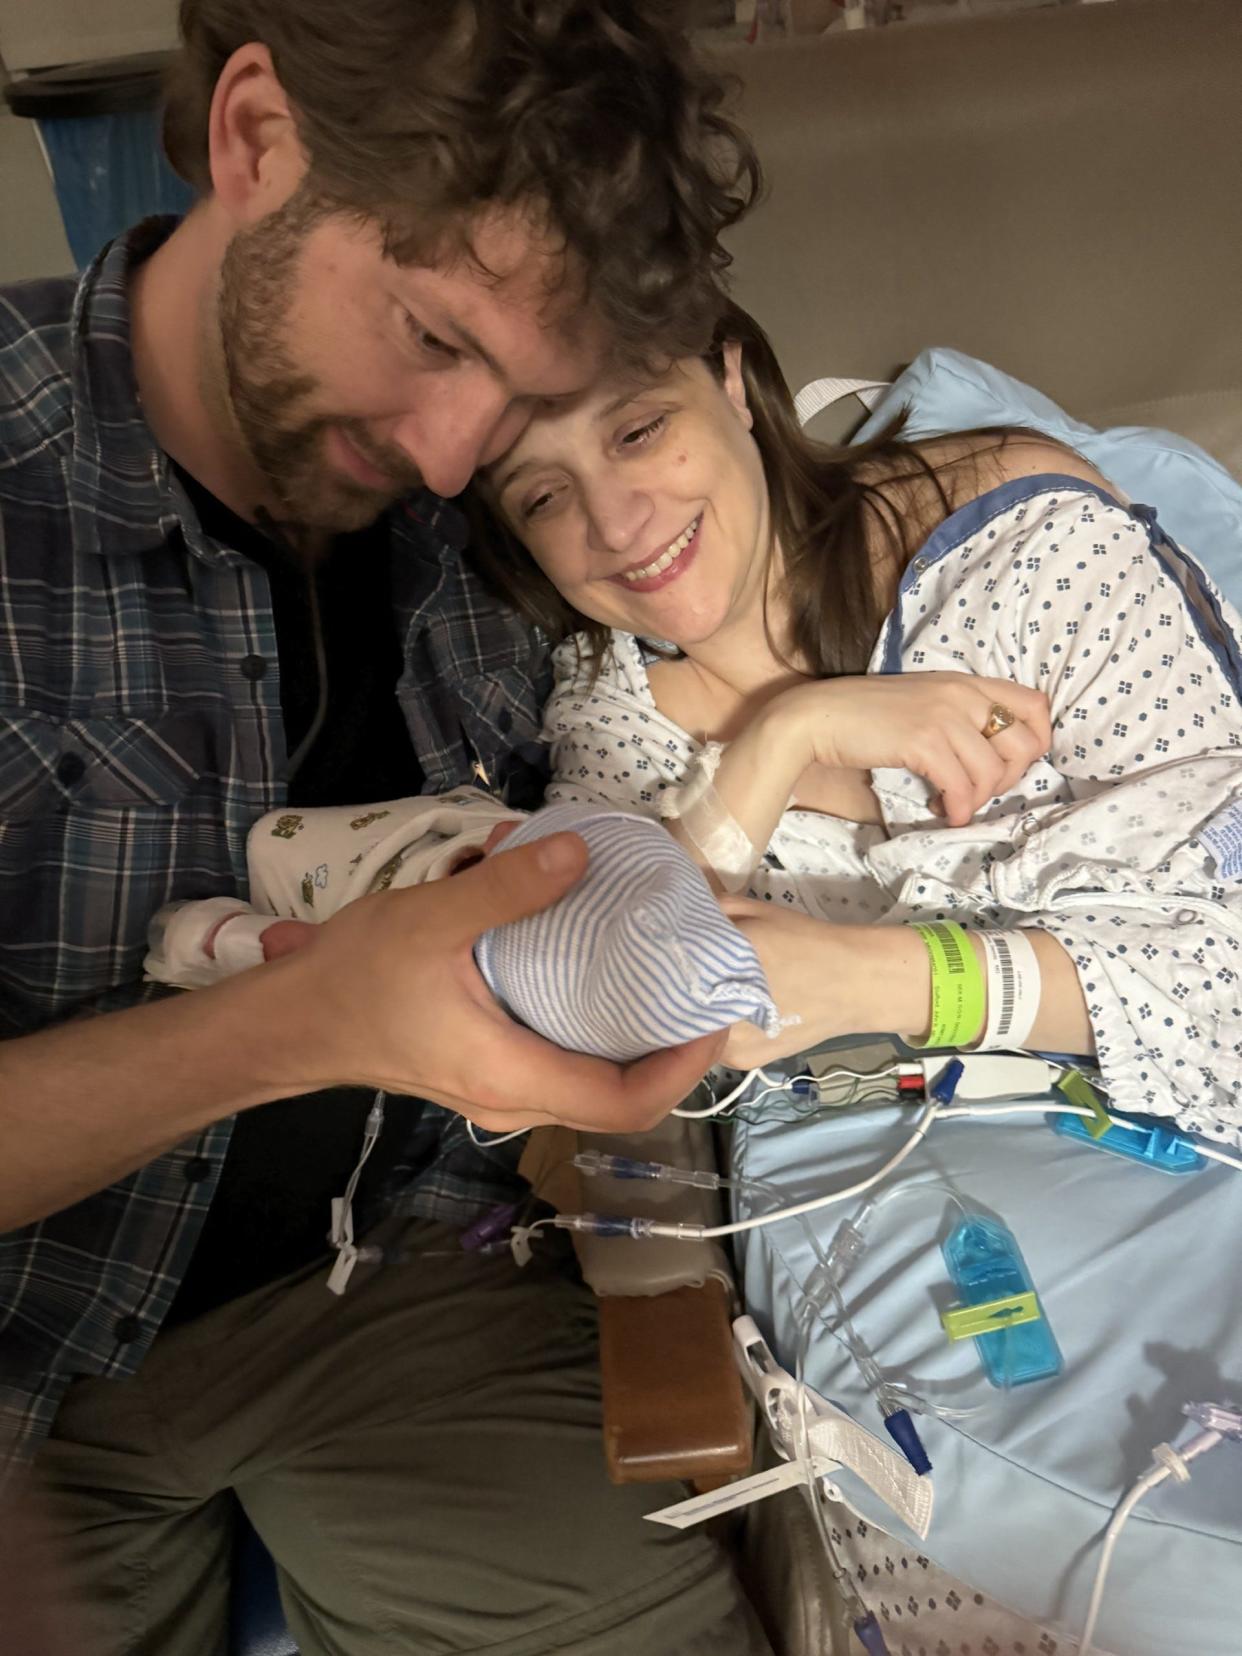 Newlyweds and new parents Michael and Nora cradle their newborn baby Reggie, born at 33 weeks at Northern Westchester Hospital in Mount Kisco, NY. Reggie was born hours after his parents were married in the Labor & Delivery unit.